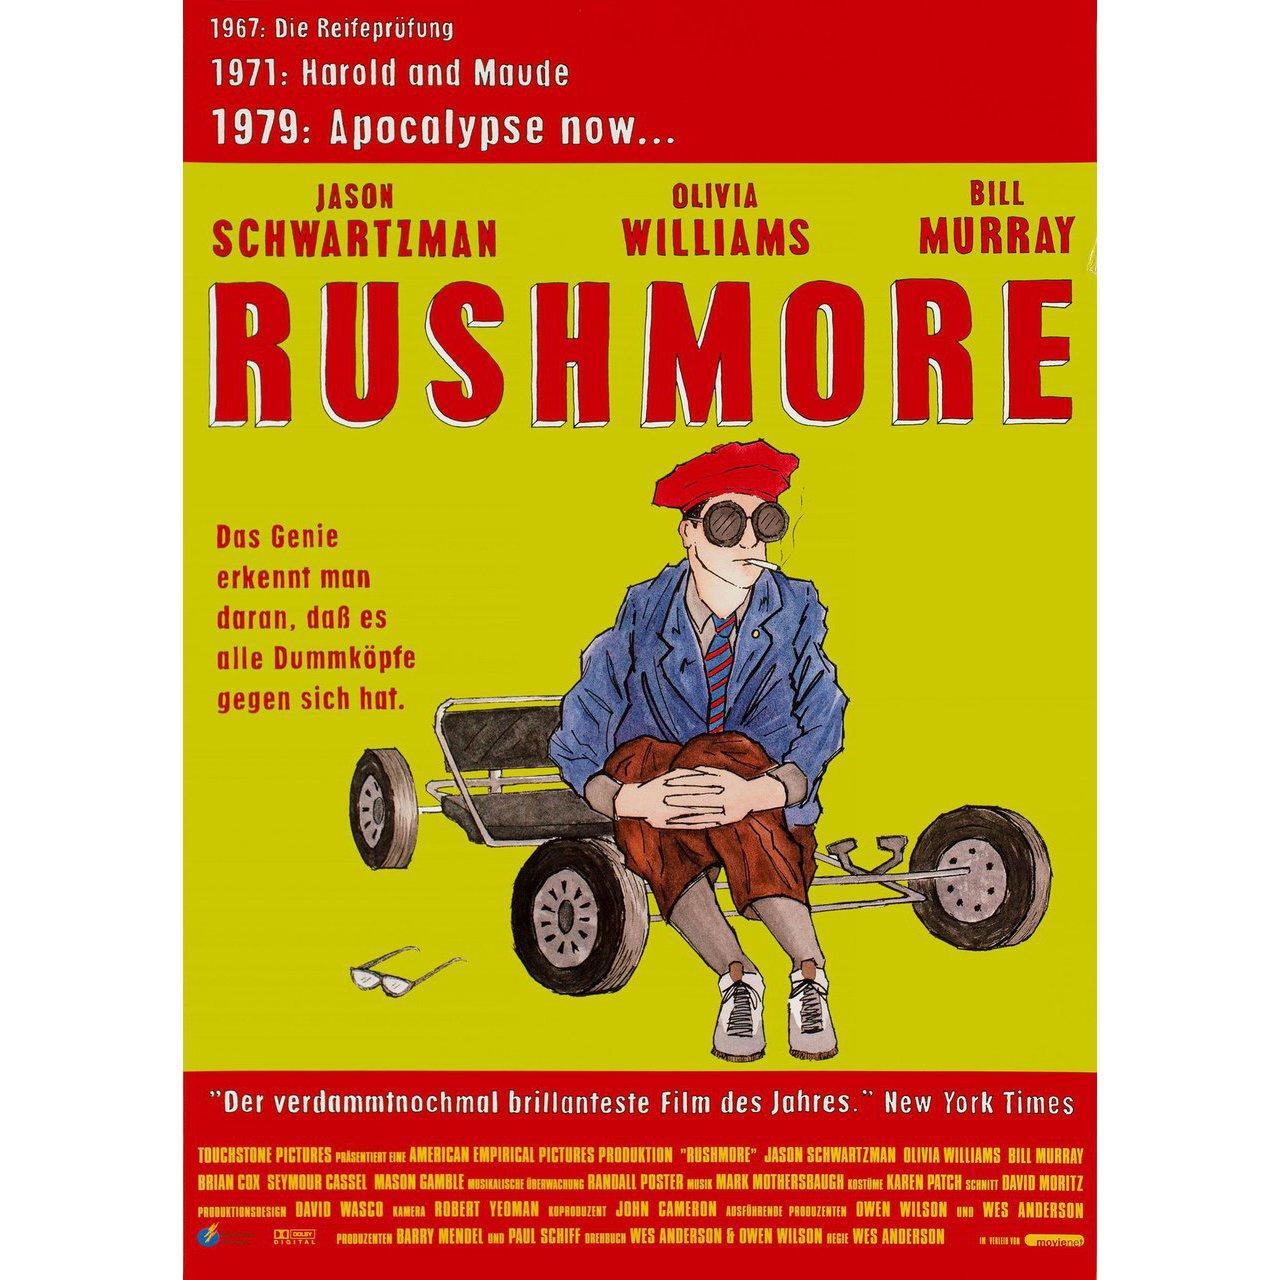 Original 1998 German A1 poster for the film Rushmore directed by Wes Anderson with Jason Schwartzman / Bill Murray / Olivia Williams / Seymour Cassel. Very Good-Fine condition, rolled. Please note: the size is stated in inches and the actual size